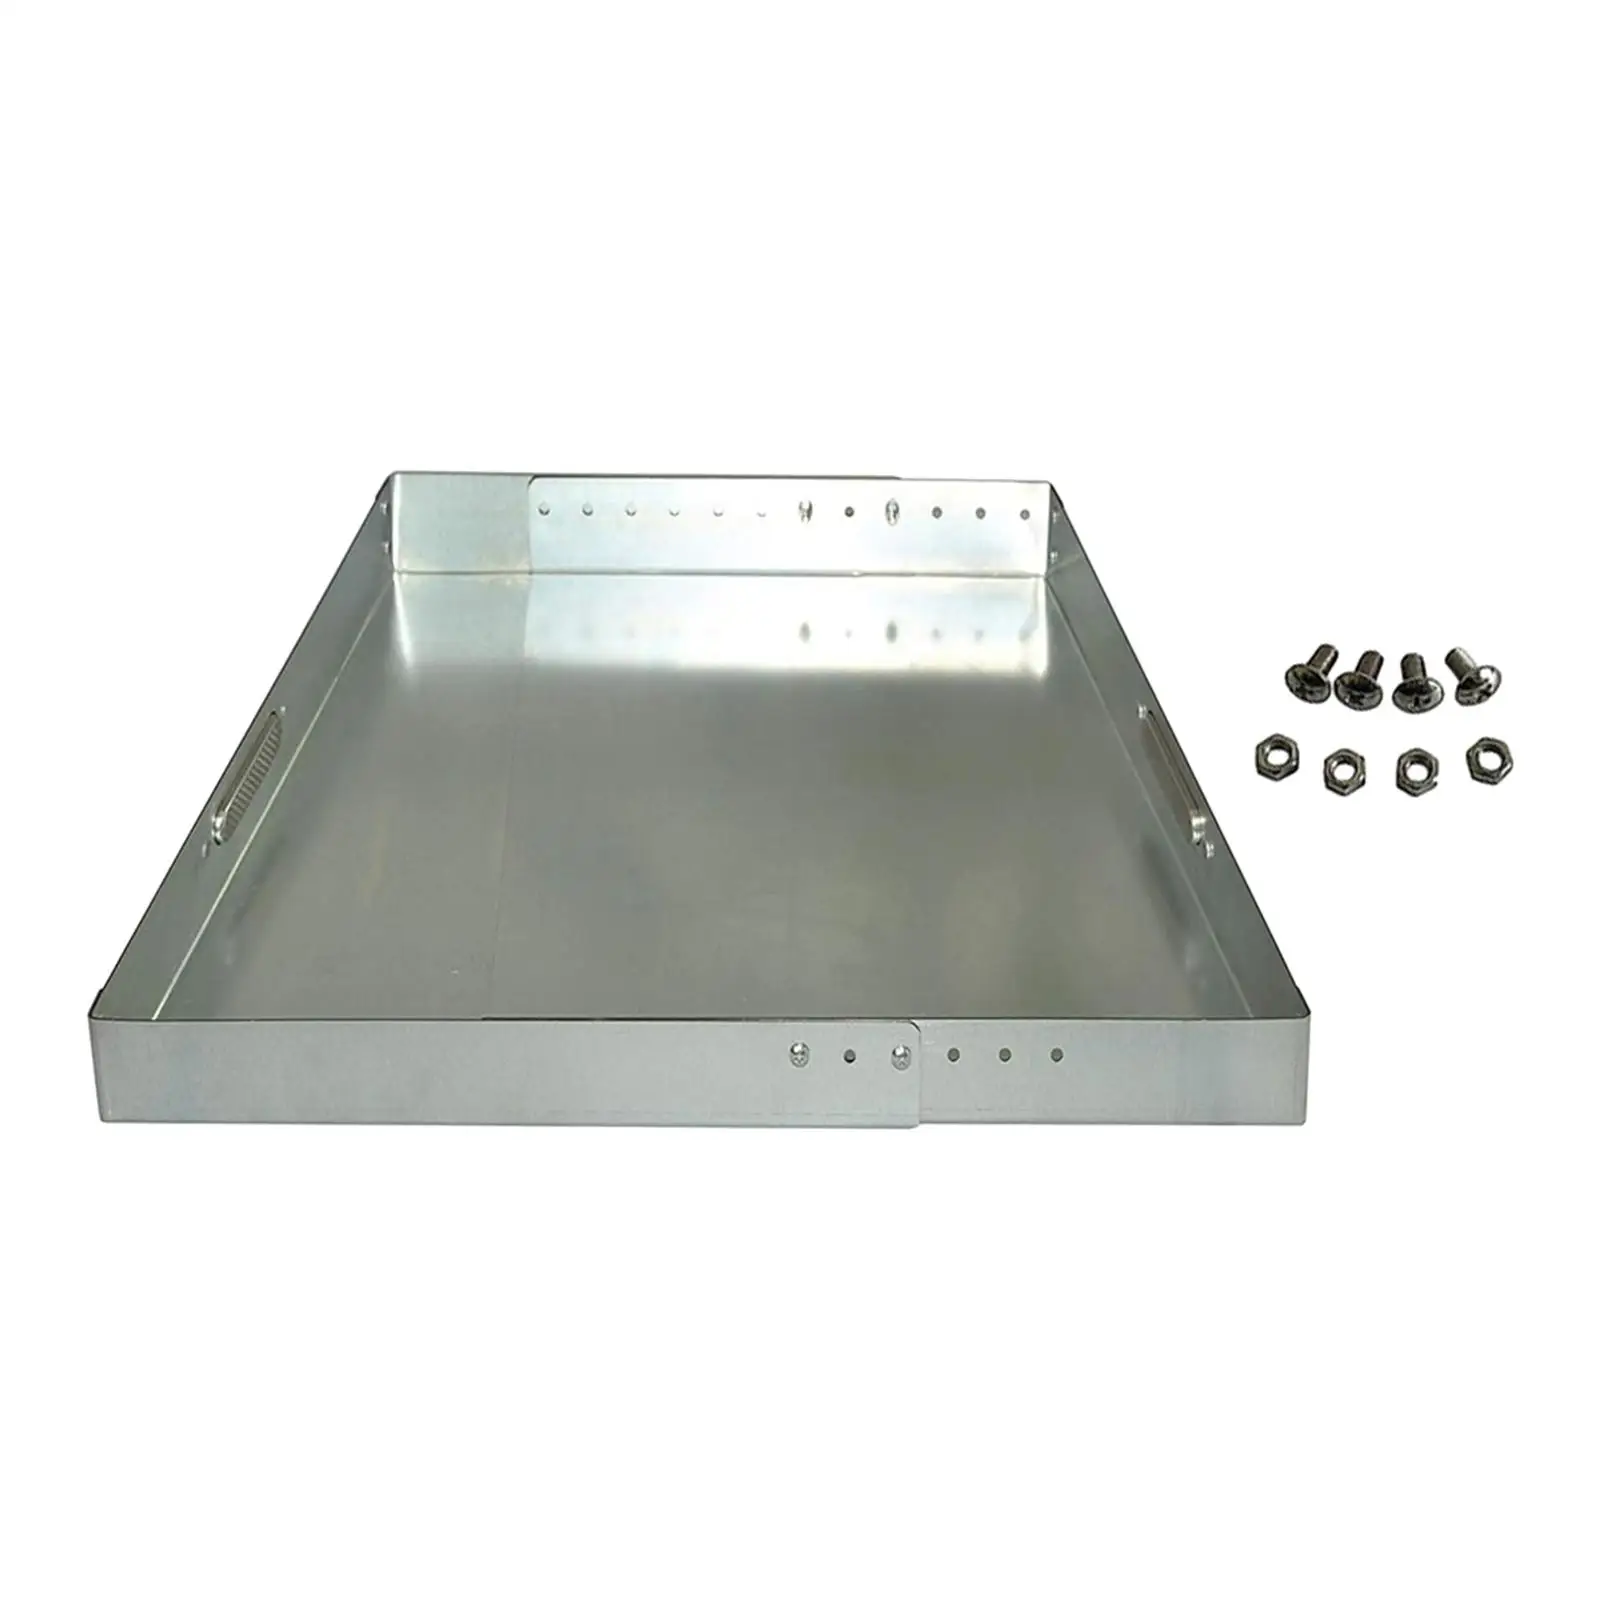 Fire Place Pan, Expandable Ash Pan, Replacement Part Adjustable Plate with